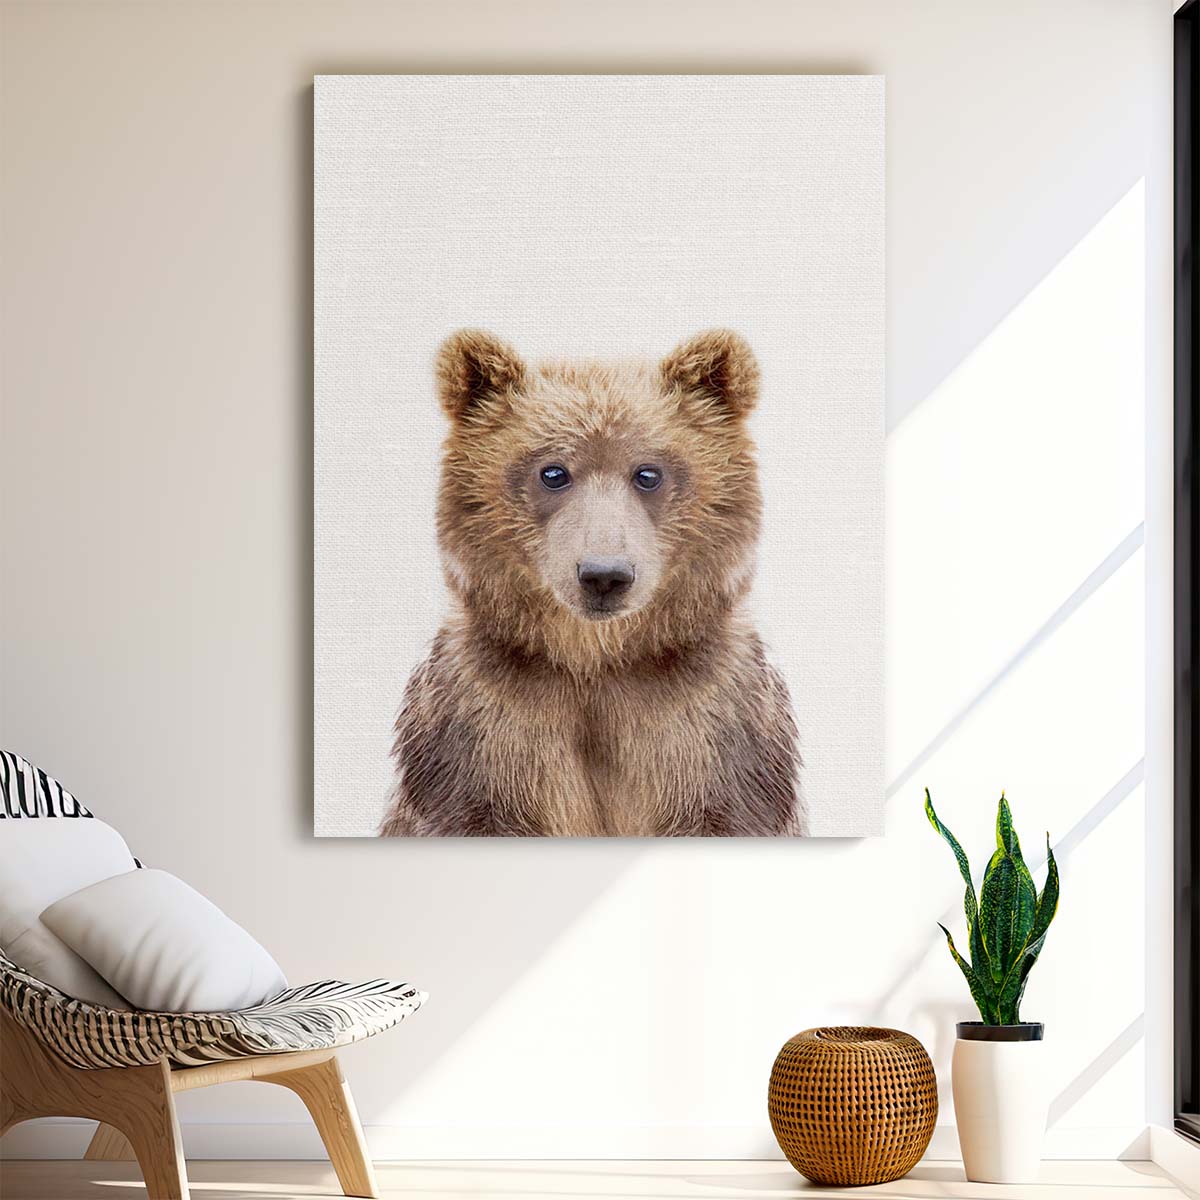 Baby Grizzly Bear Portrait - Kathrin Pienaar Wildlife Photography by Luxuriance Designs, made in USA